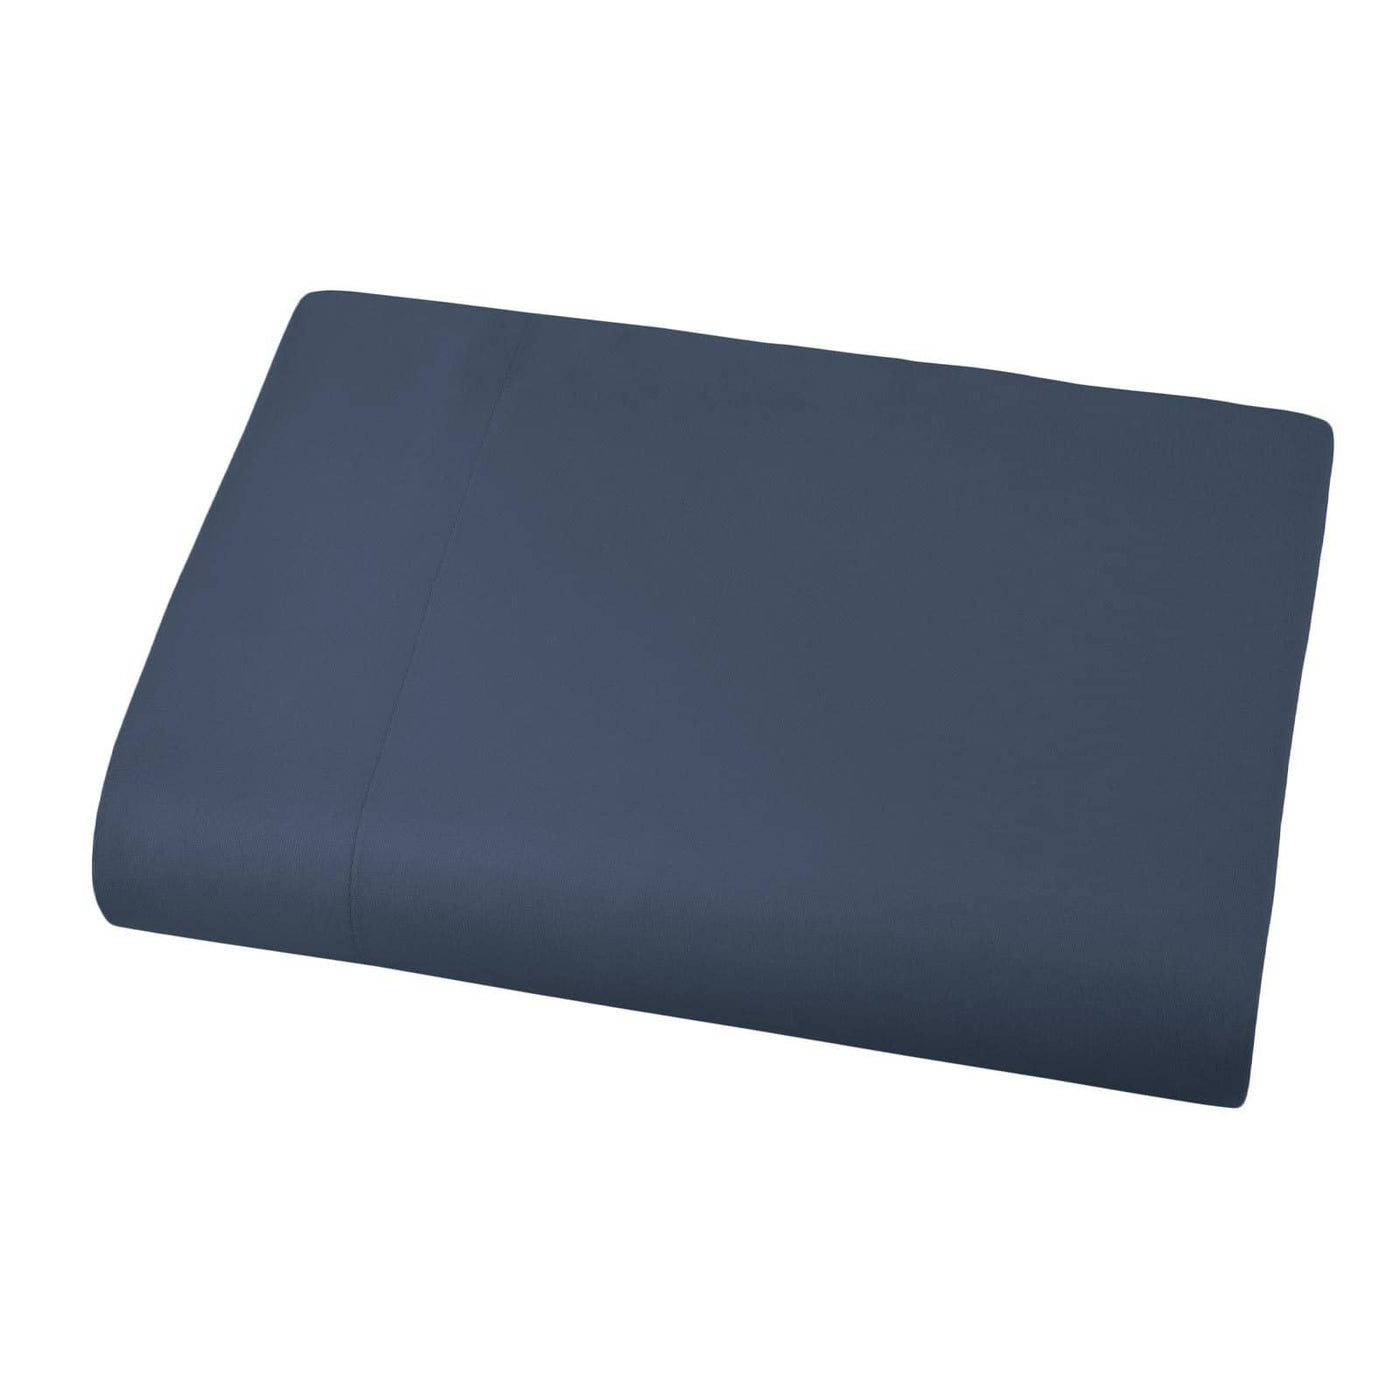 Soft and Luxurious Over-sized Flat Sheet 132 in x 110 in by Vilano springs in Dark Blue#color_vilano-dark-blue